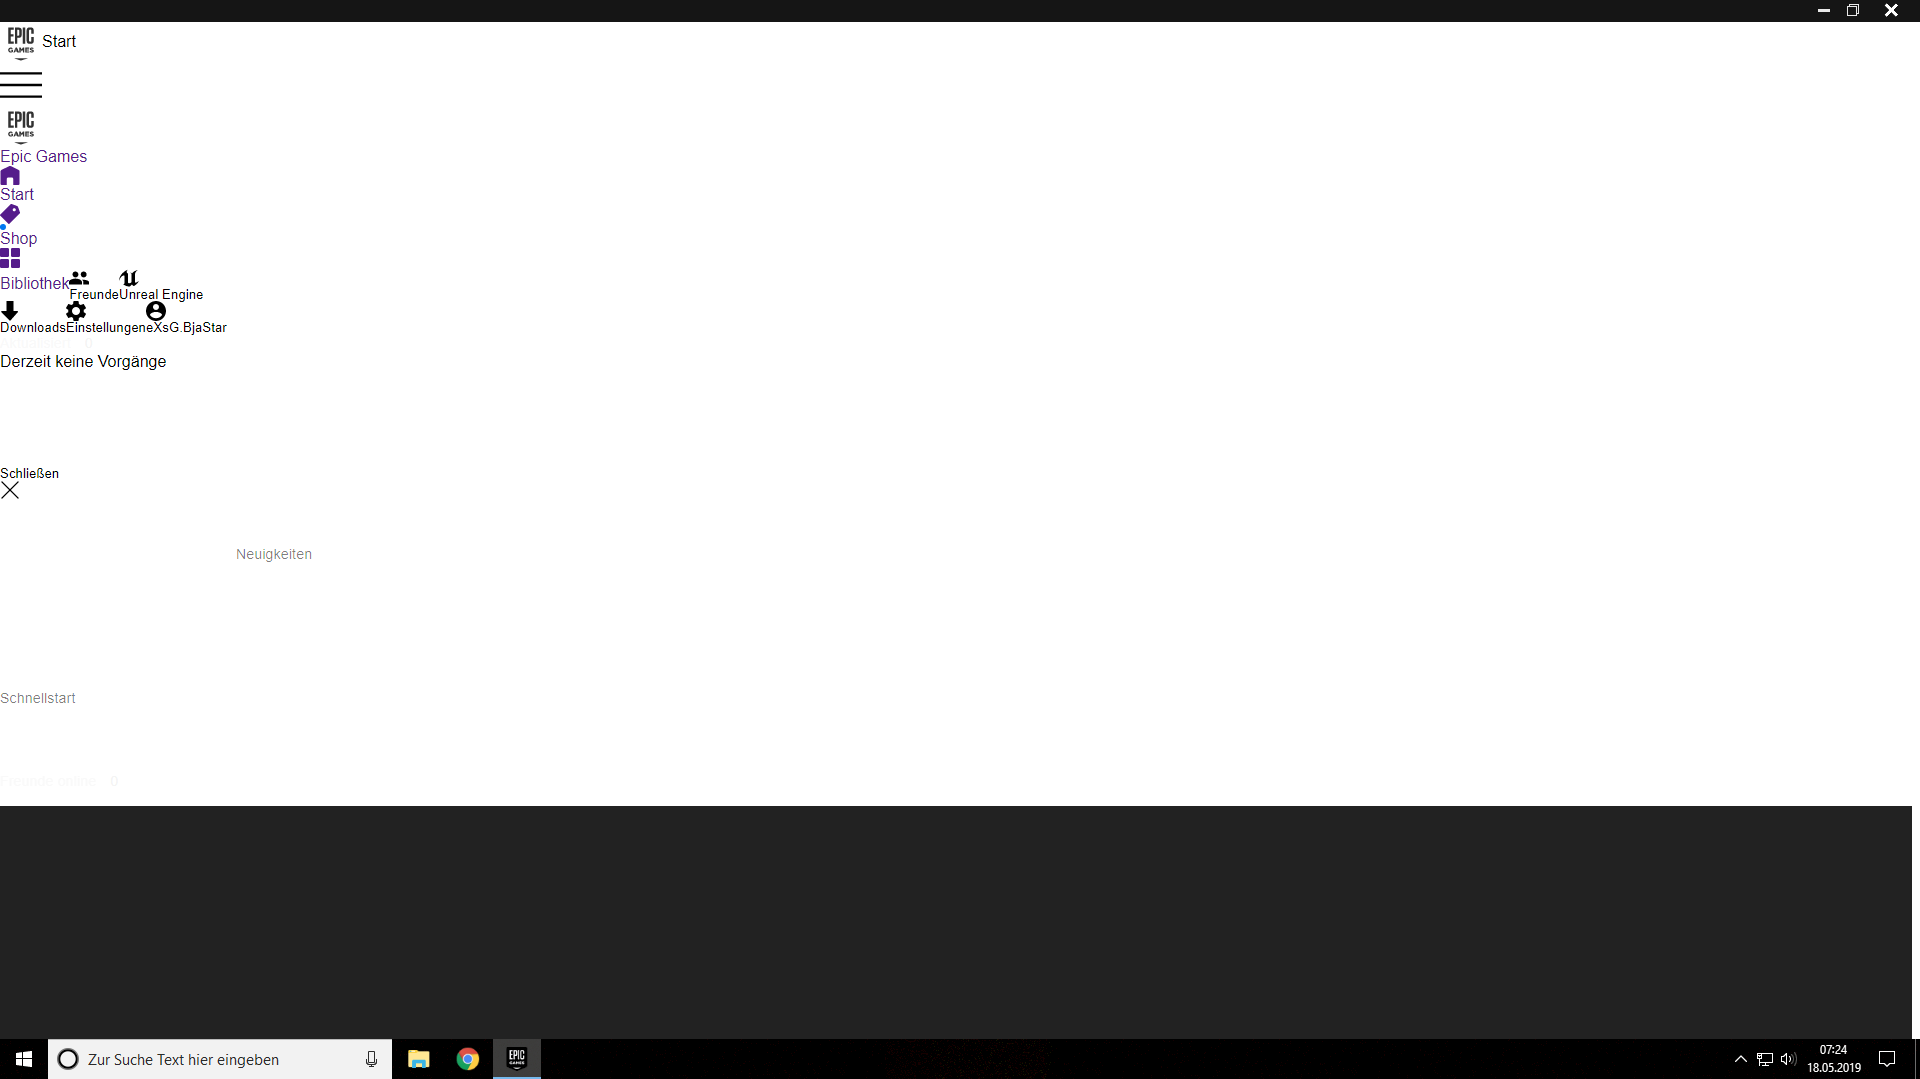 Epicgames Launcher is not working anymore and is white